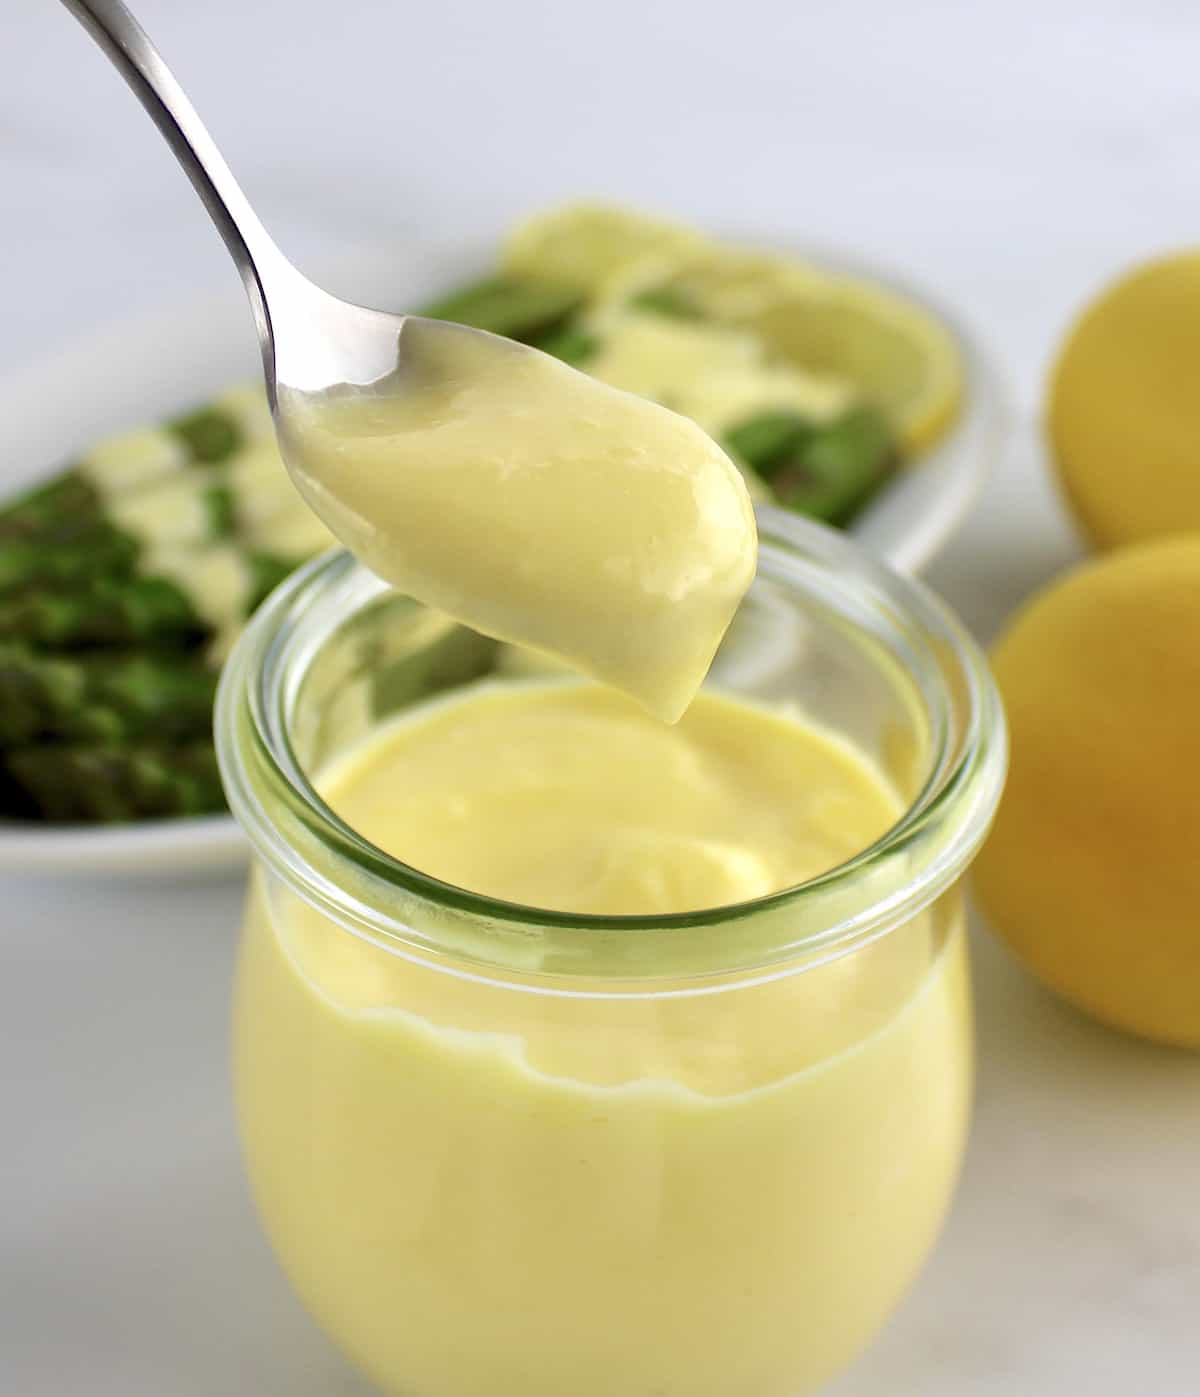 Hollandaise Sauce being spooned out of glass jar